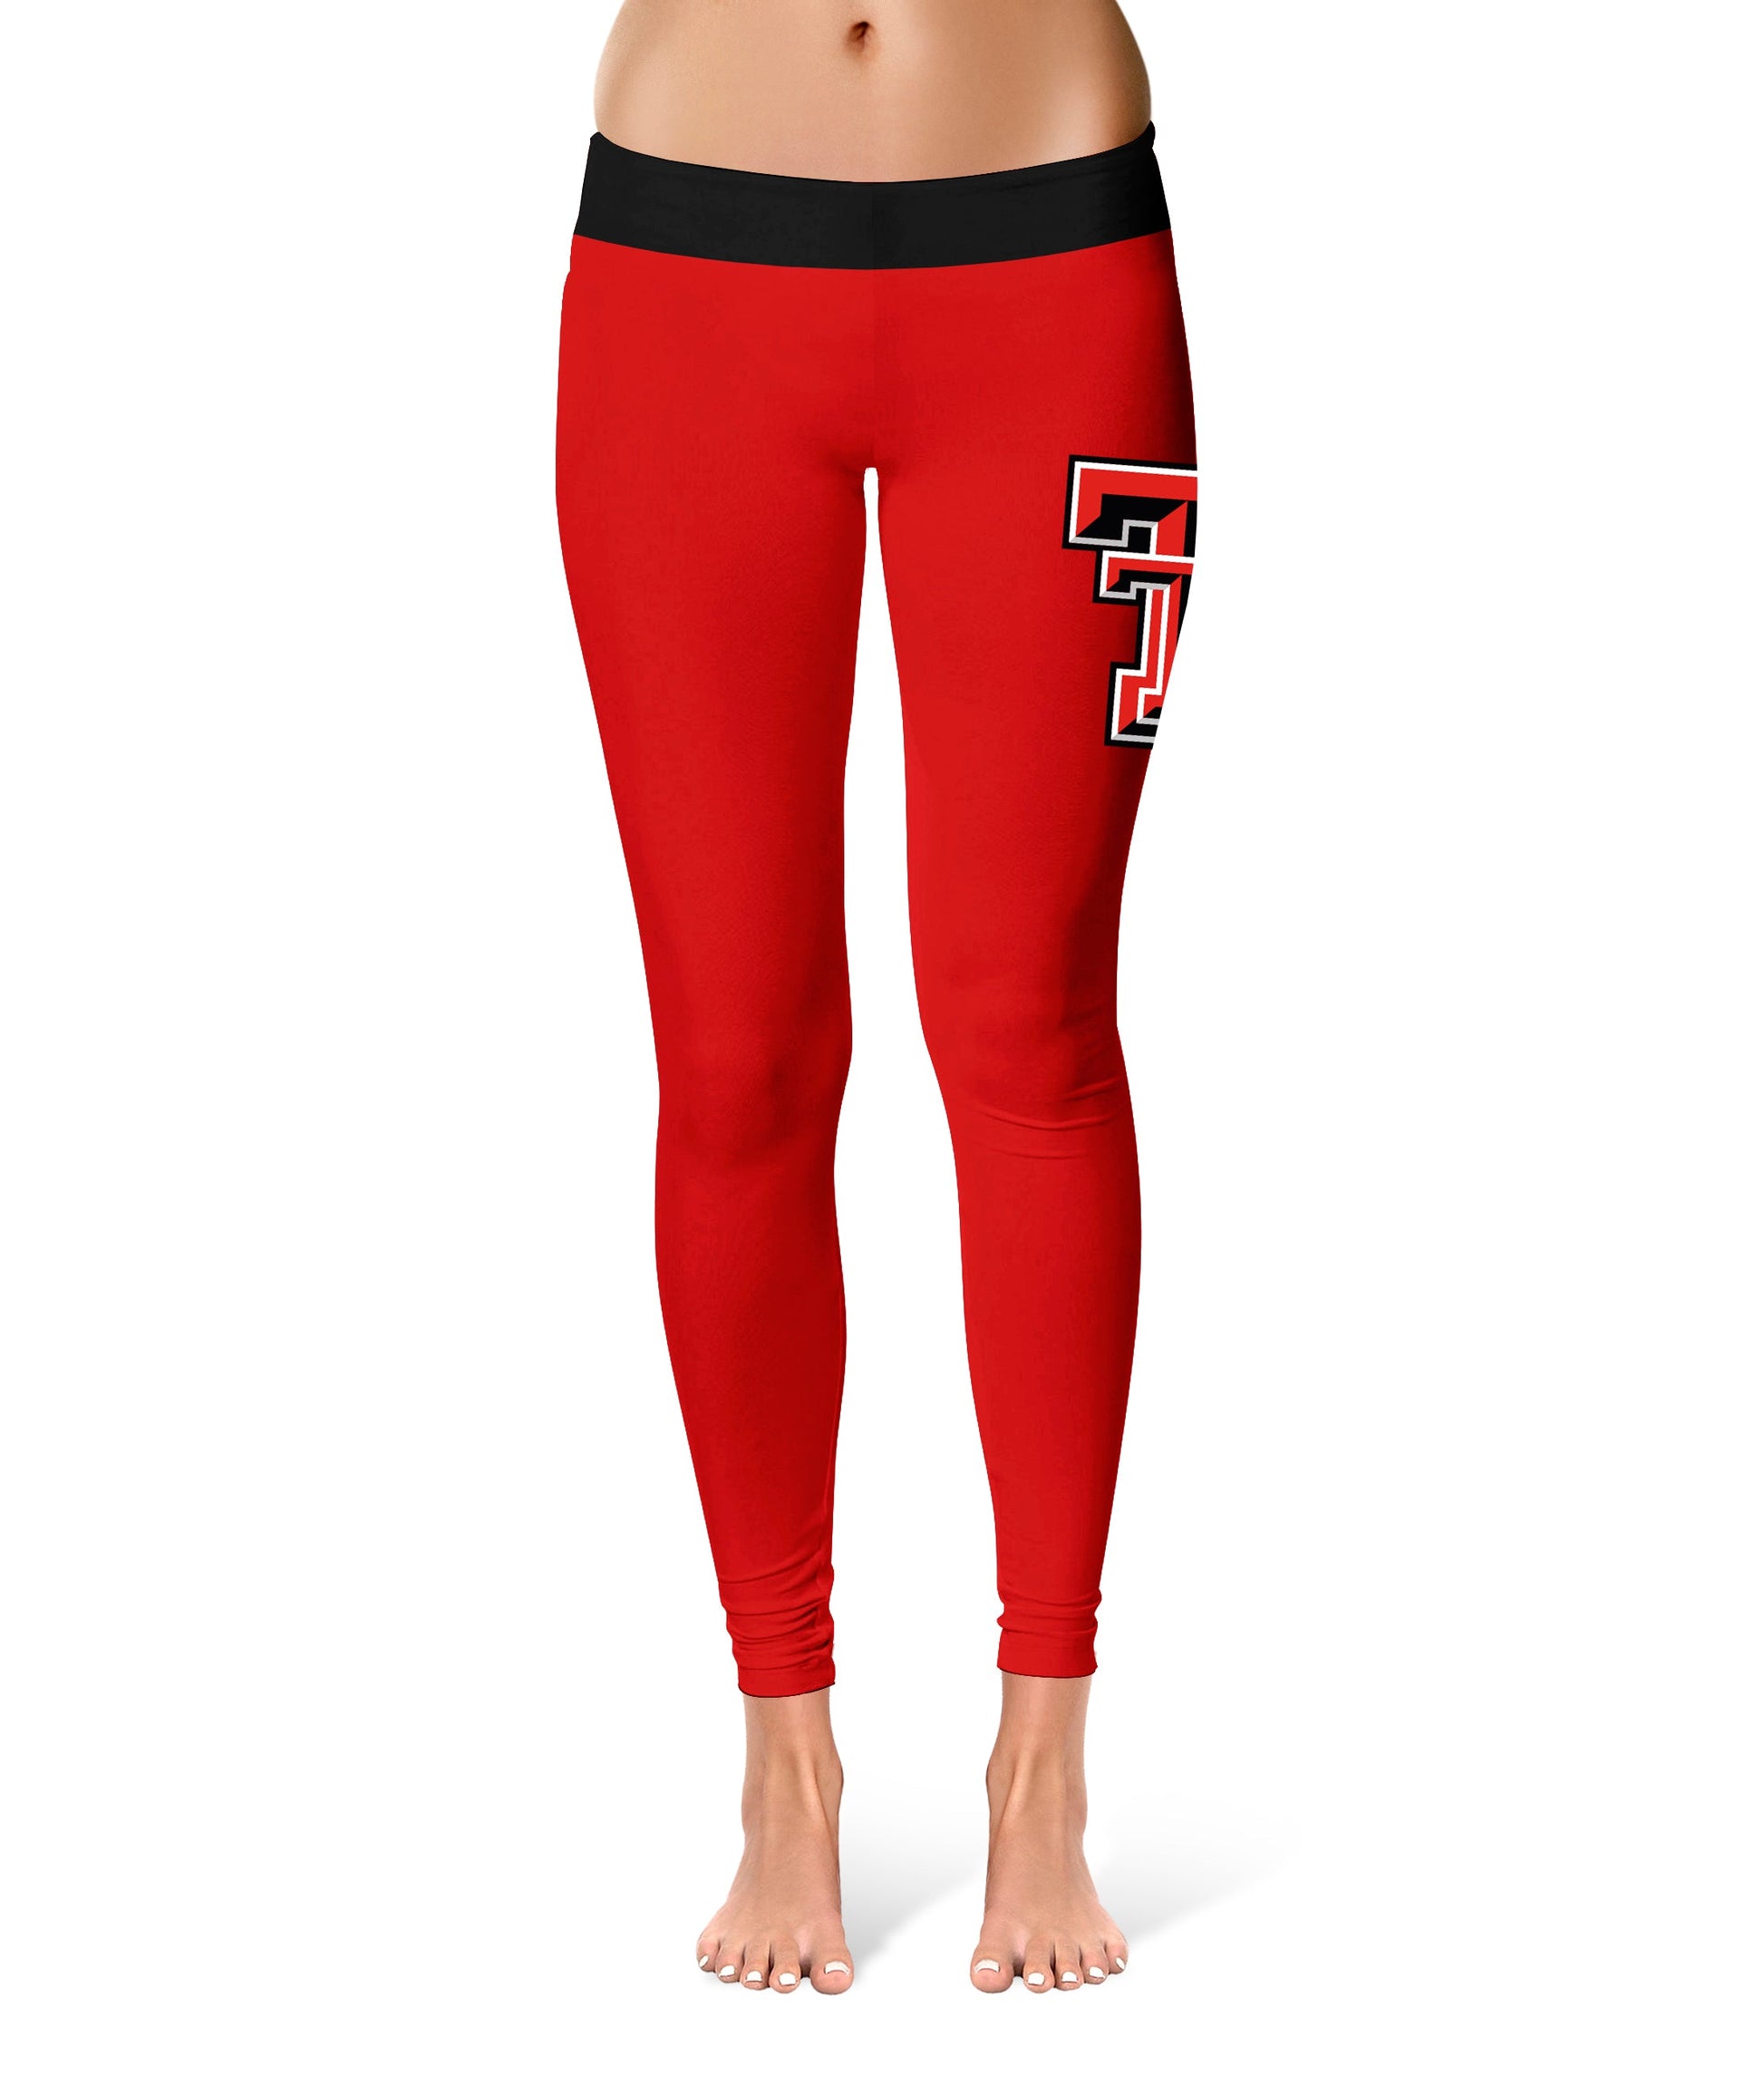 Texas Tech Red Raiders Game Day Logo on Thigh Red Yoga Leggings for Women  2.5 Waist Tights